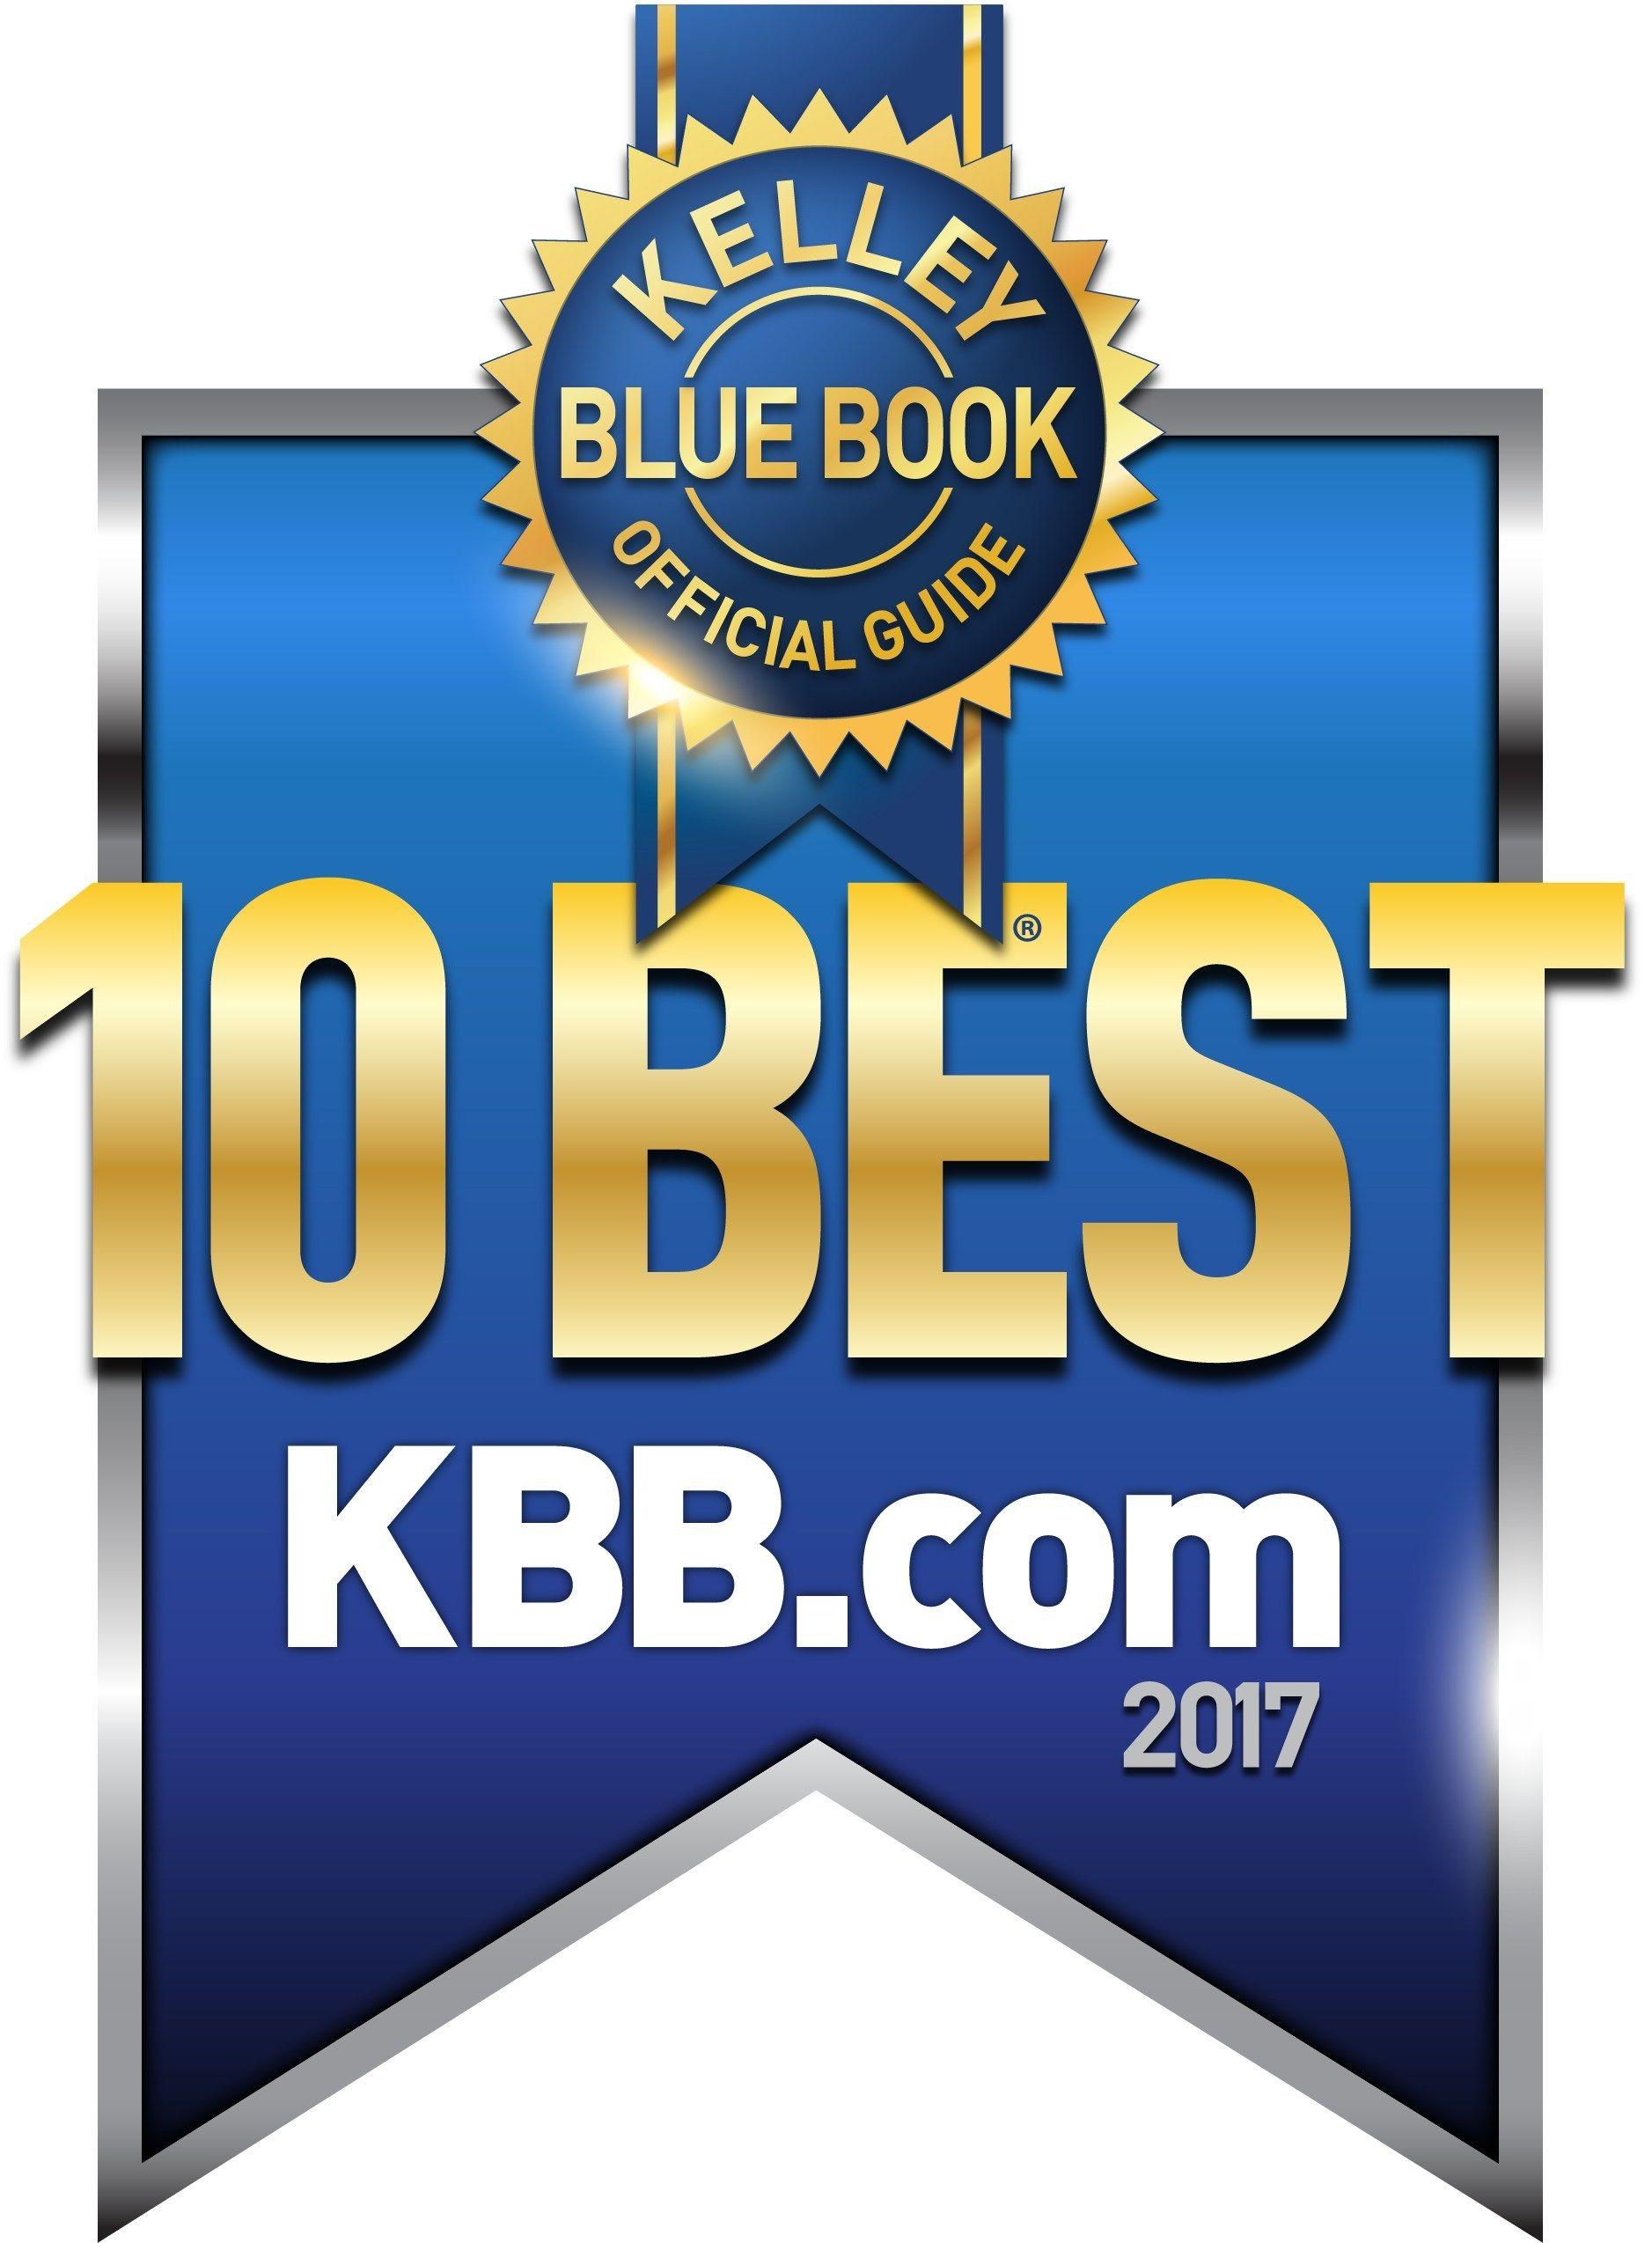 KBB Logo - Most Awarded Cars, Brands of 2017 by Kelley Blue Book's KBB.com